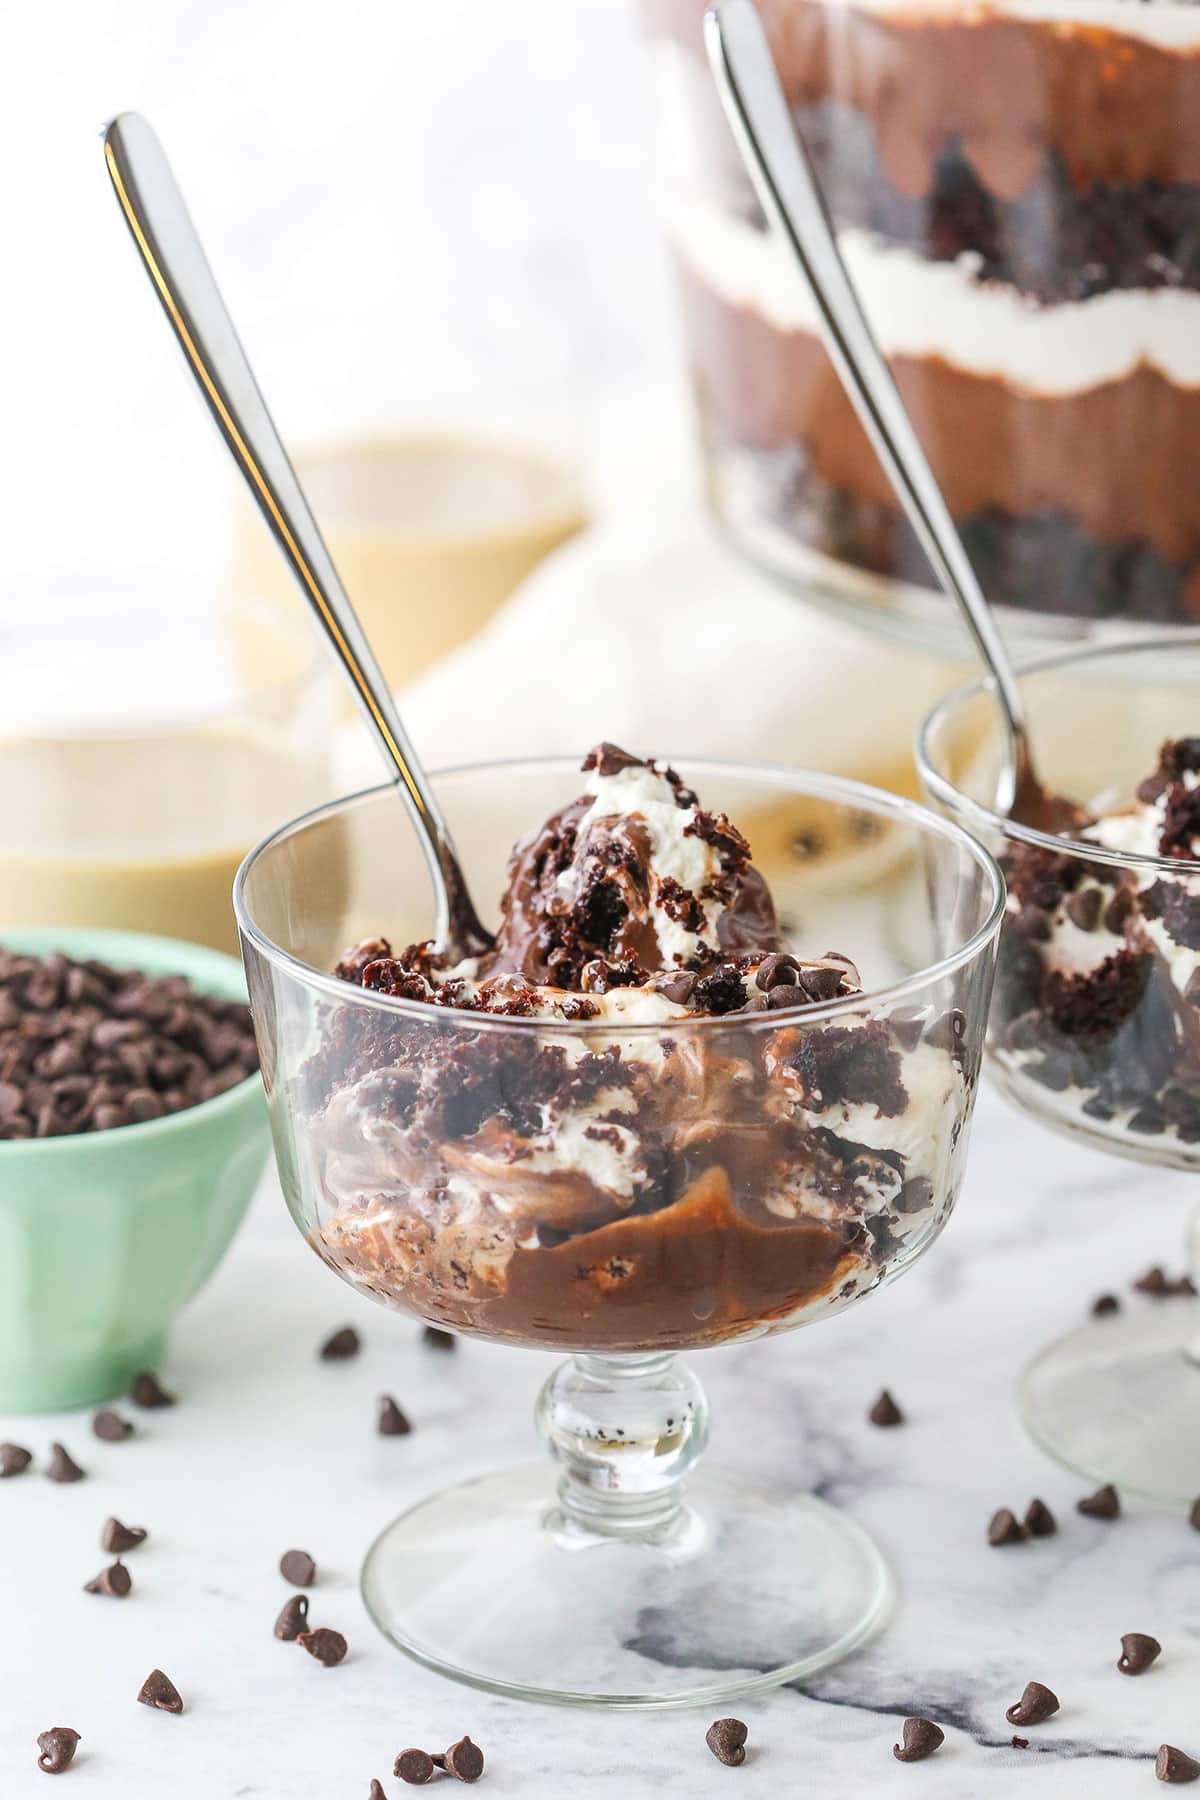 Two individual servings of Boozy Baileys Chocolate Trifle in glass bowls with spoons